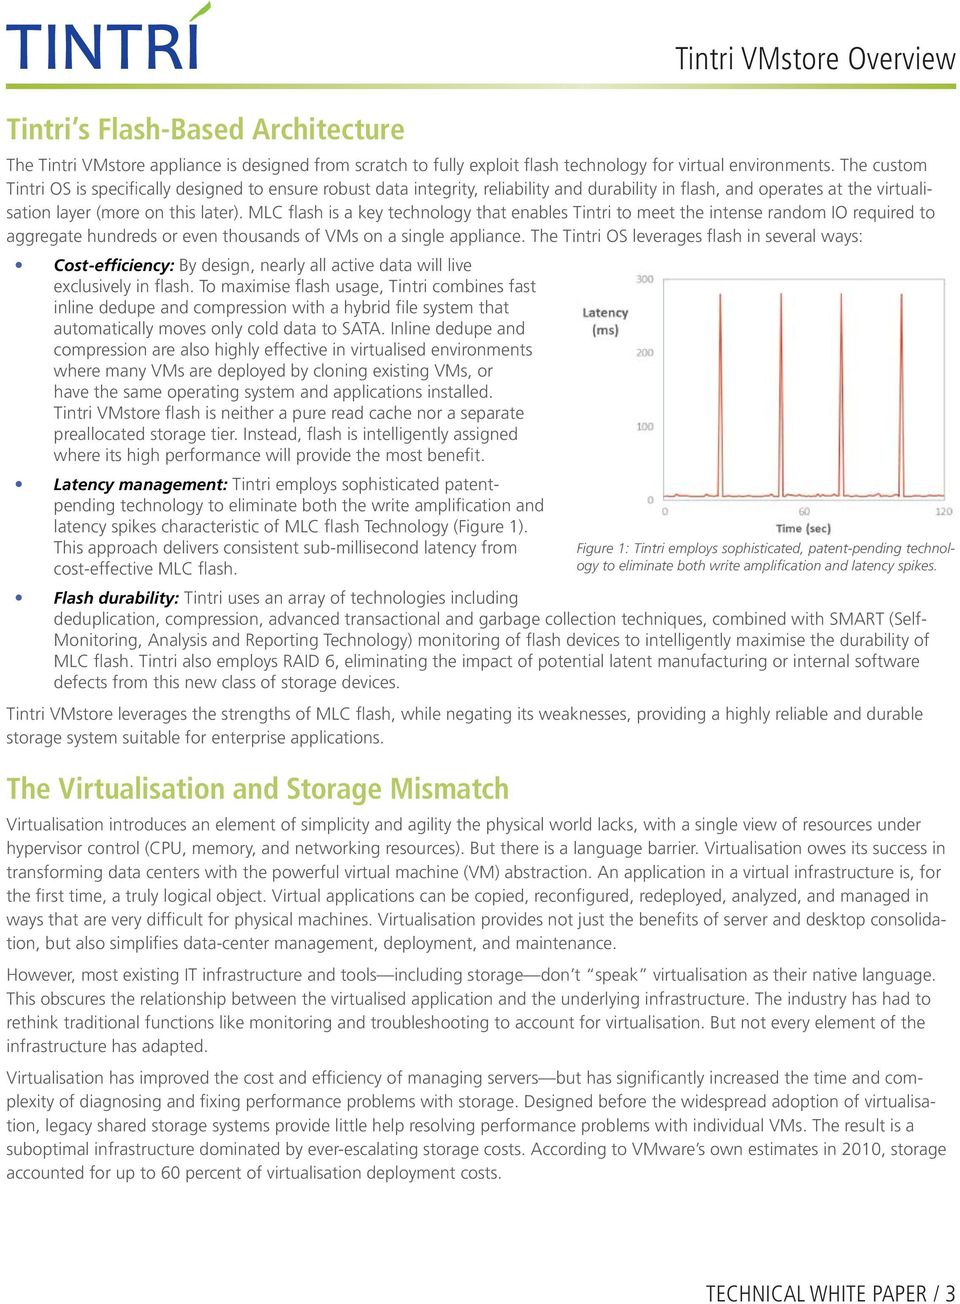 MLC flash is a key technology that enables Tintri to meet the intense random IO required to aggregate hundreds or even thousands of VMs on a single appliance.